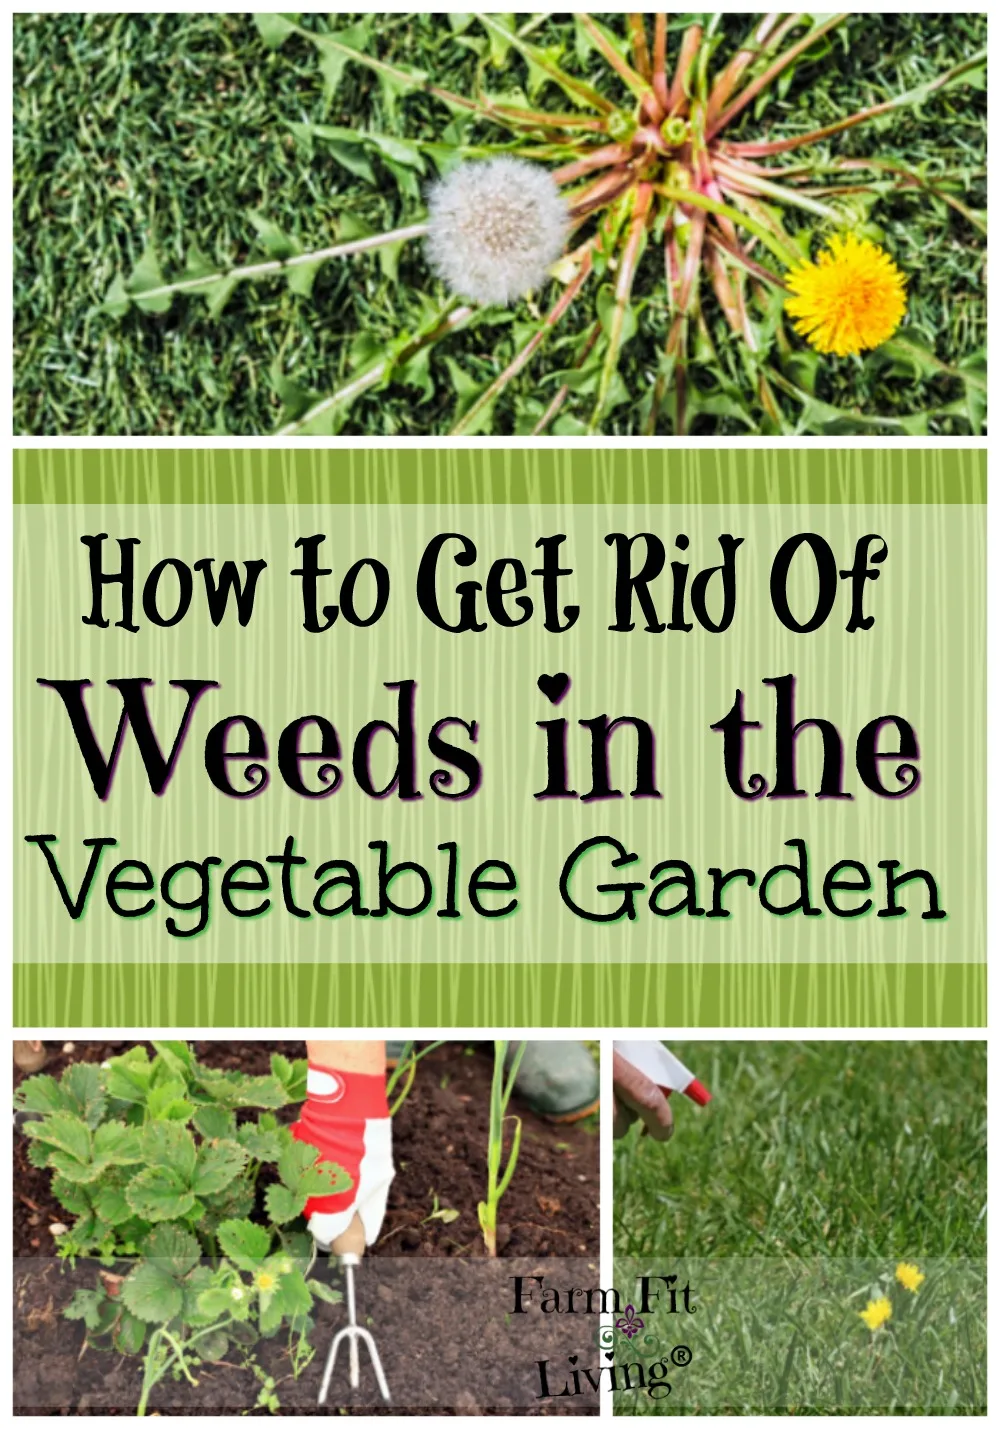 Get Rid Of Weeds In Vegetable Gardens, How To Weed A Large Vegetable Garden